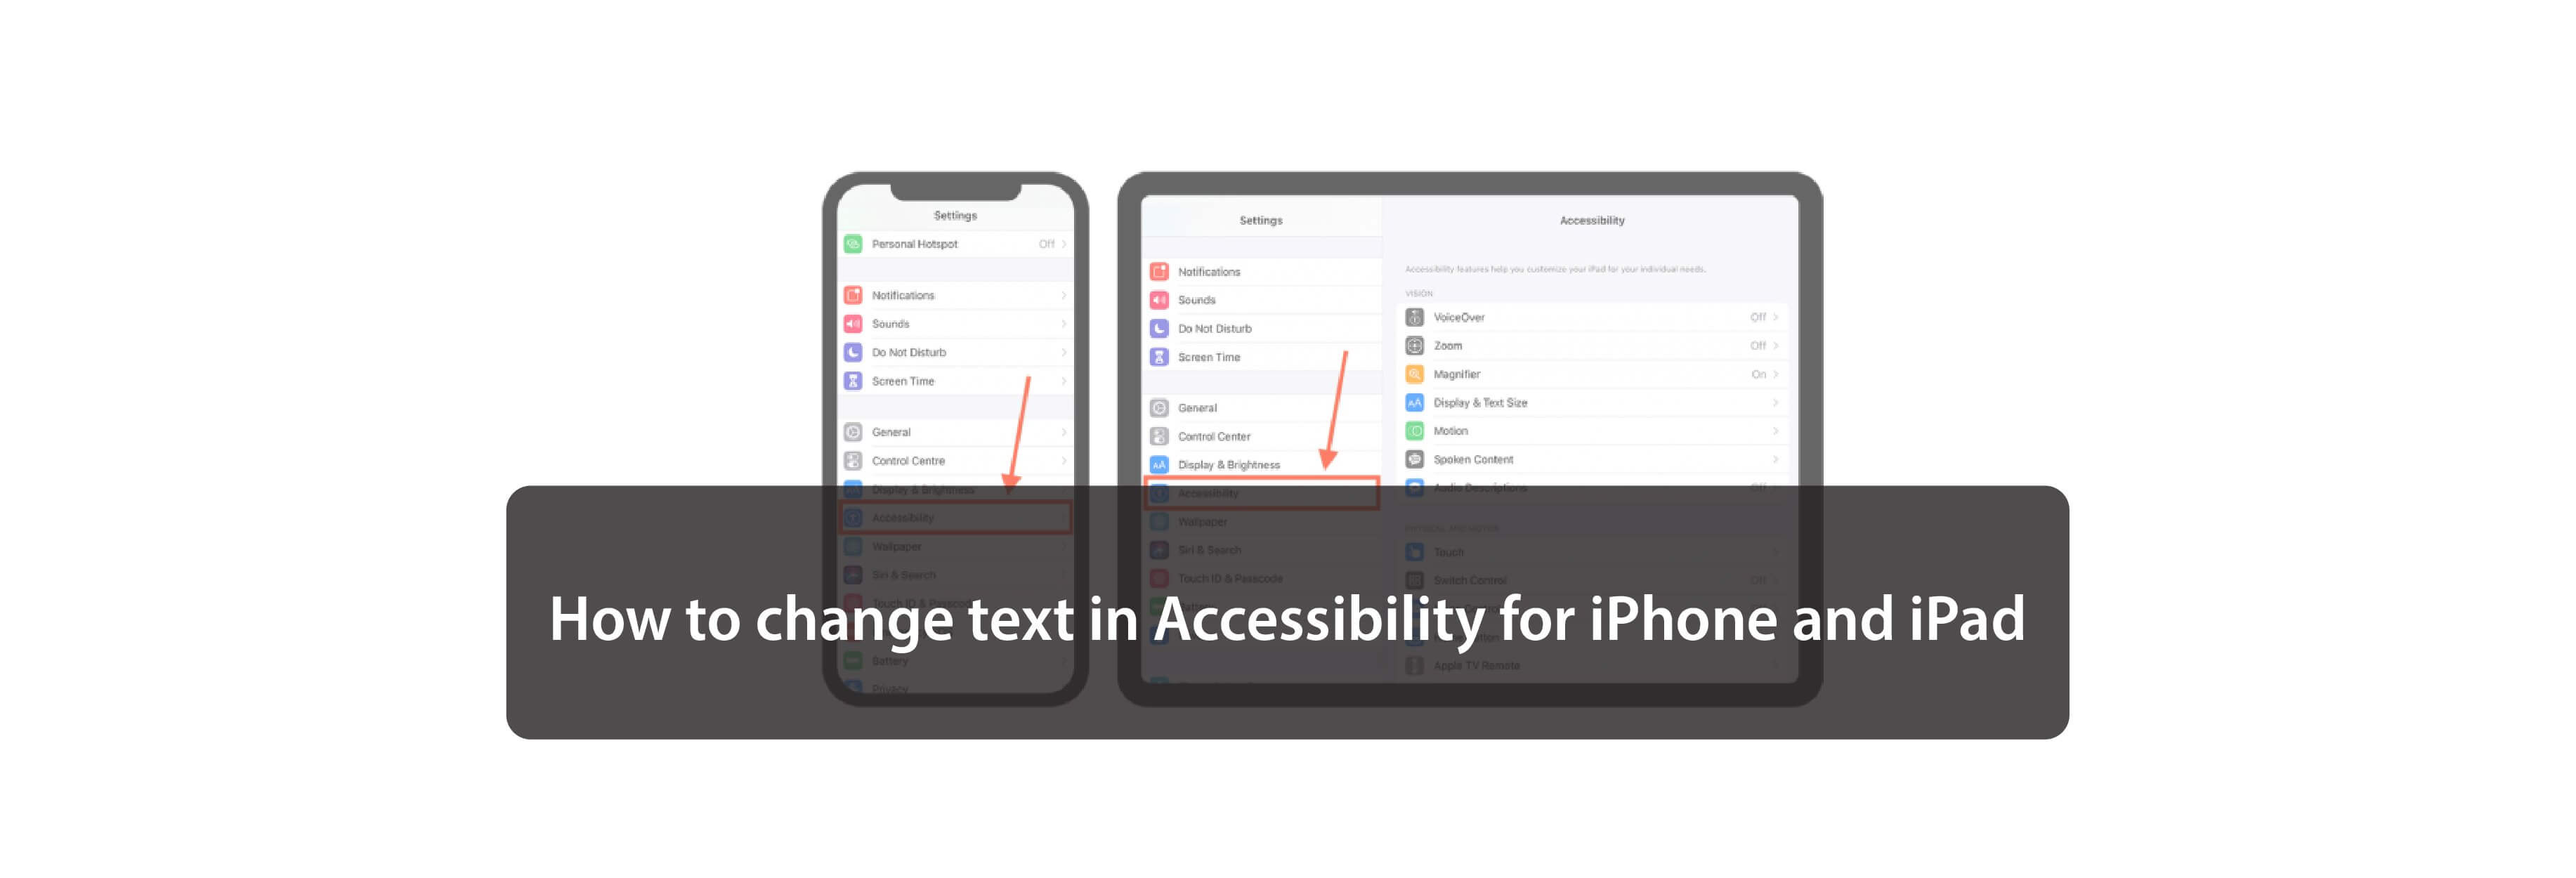 How to change text in Accessibility for iPhone and iPad